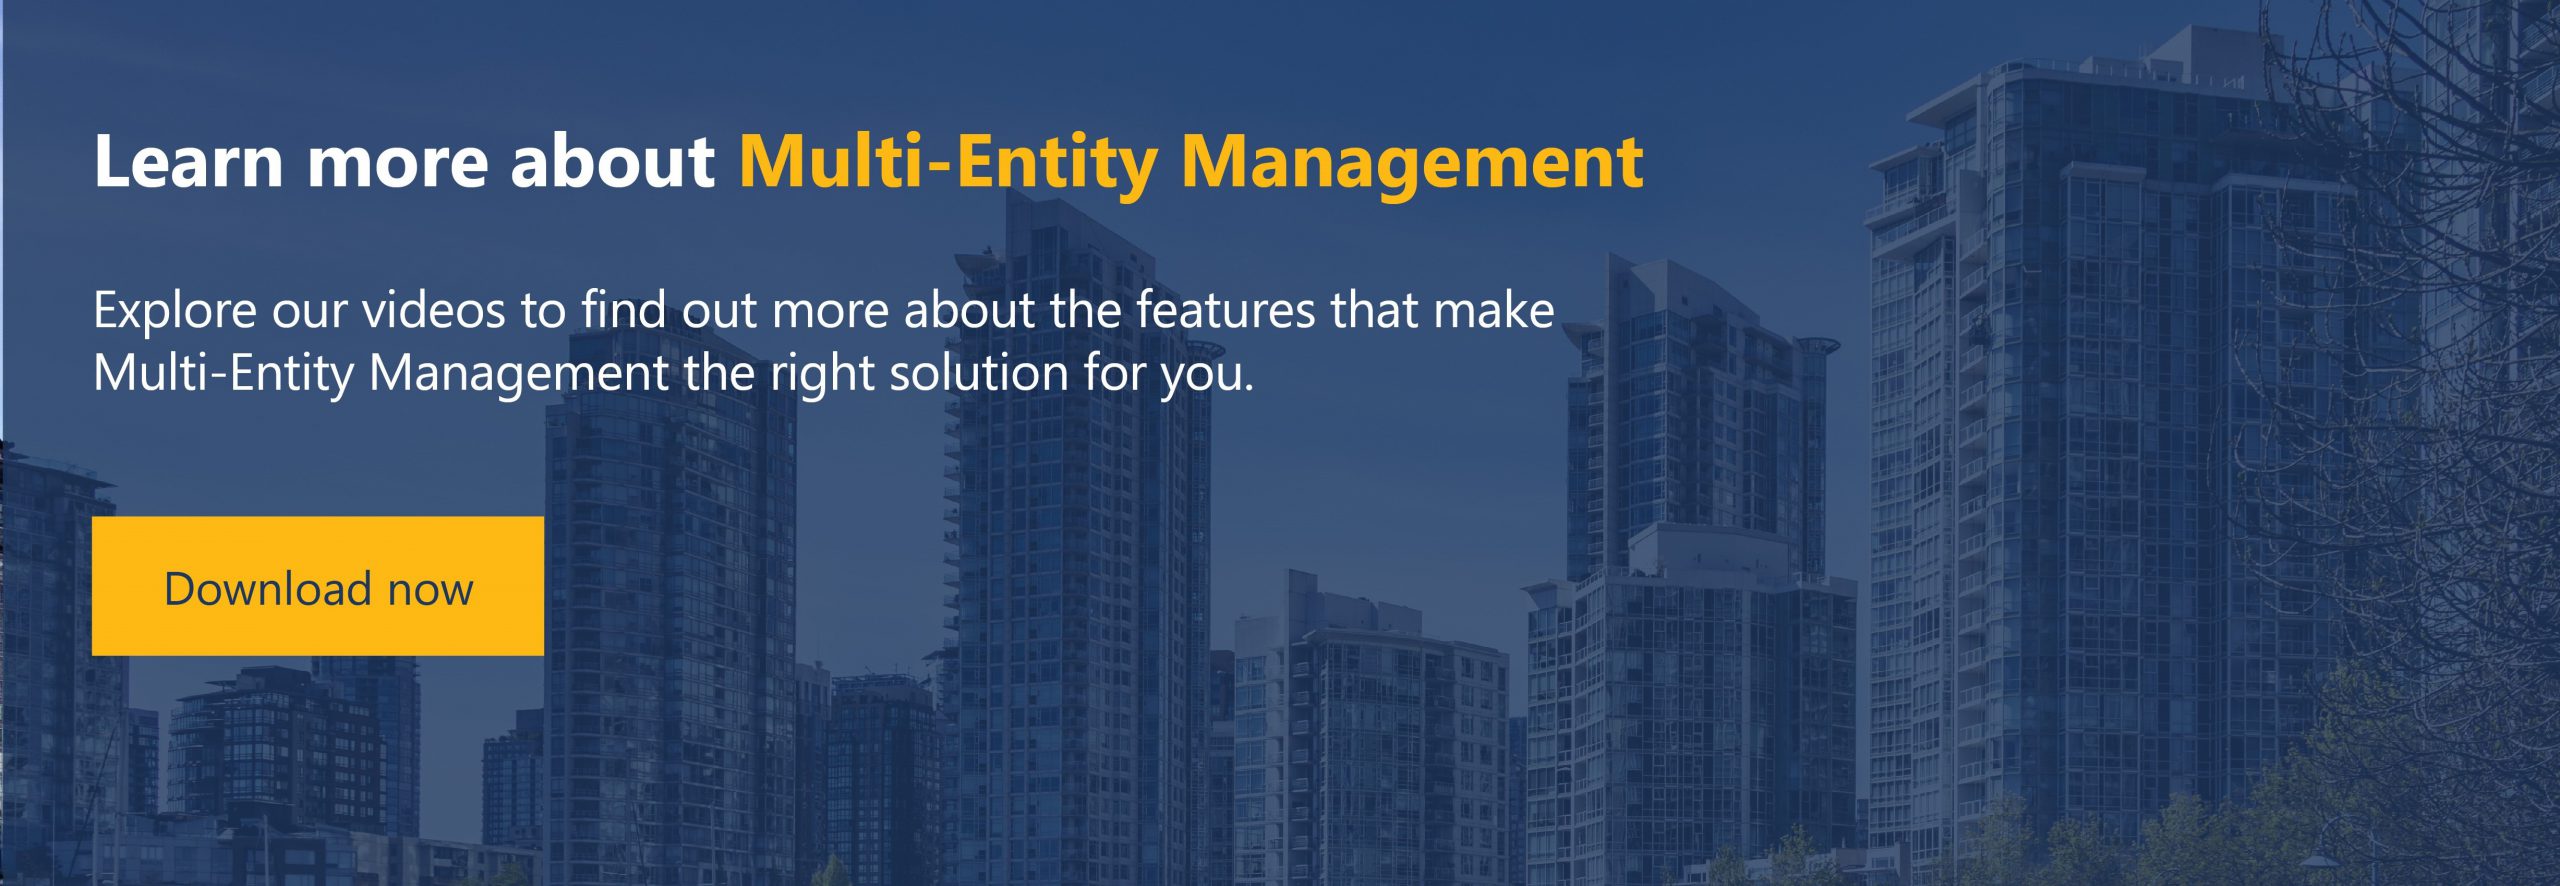 Learn more about Multi-Entity Management  